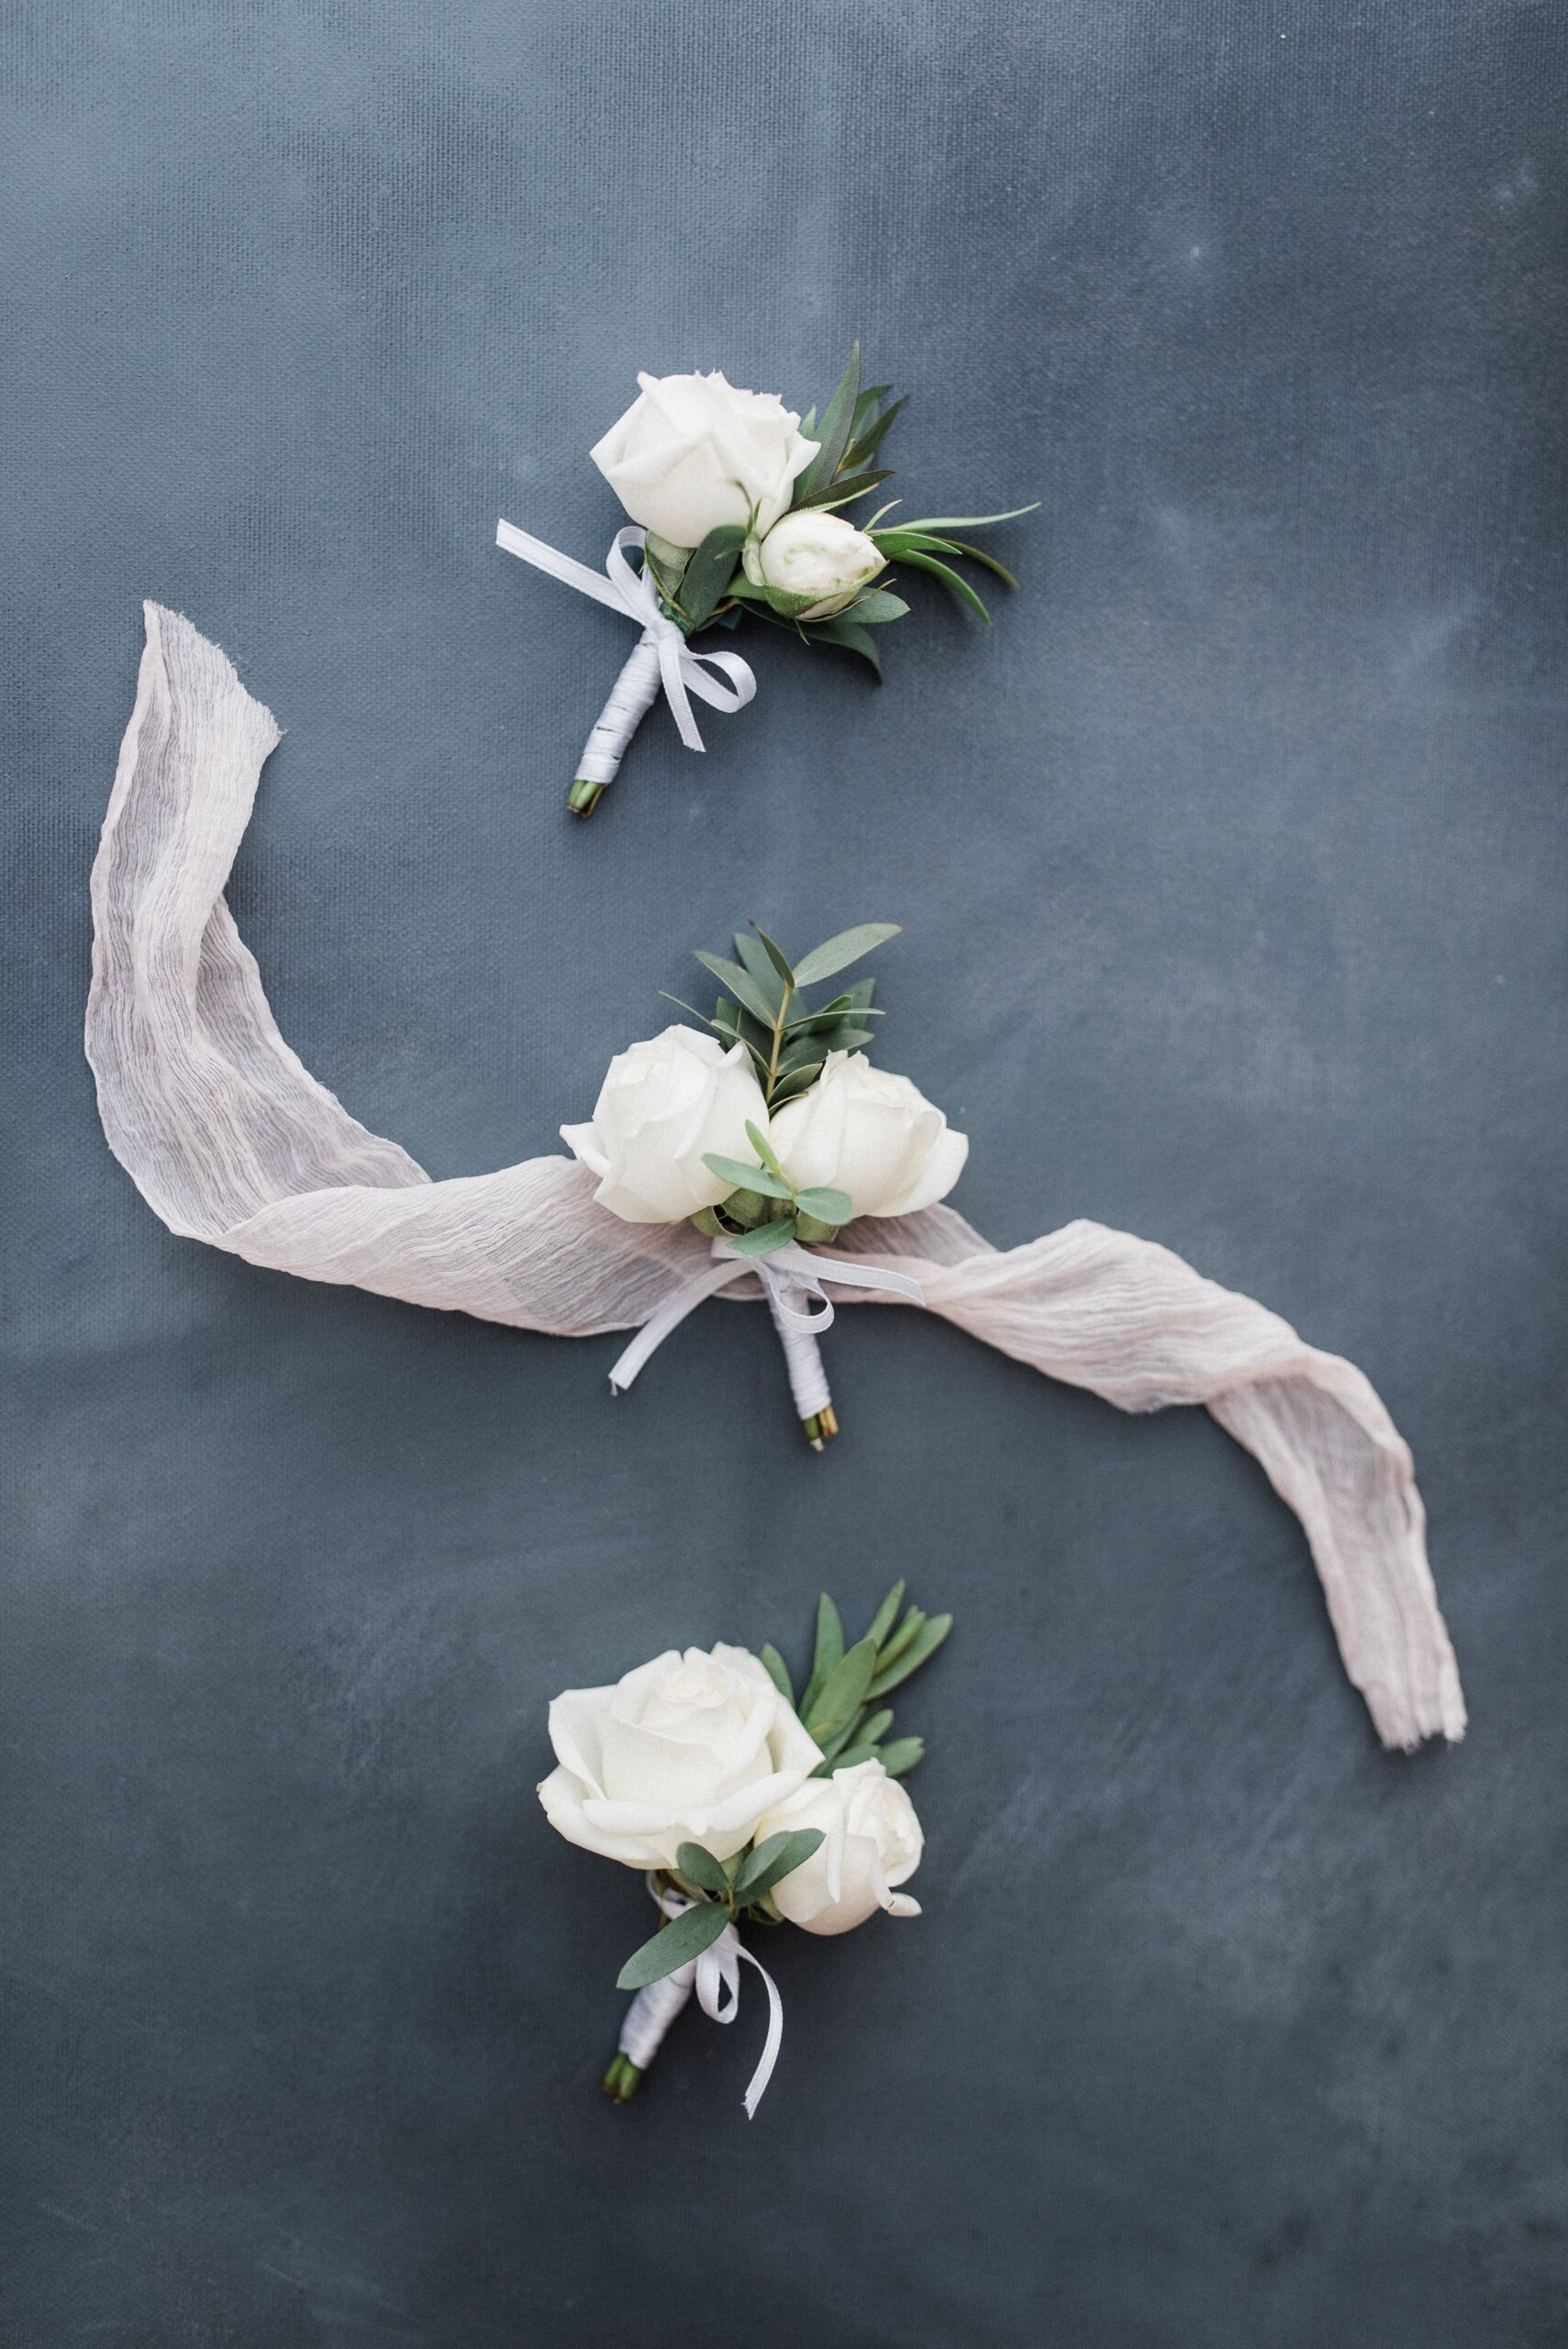 Elegant white buttonhole and coursage